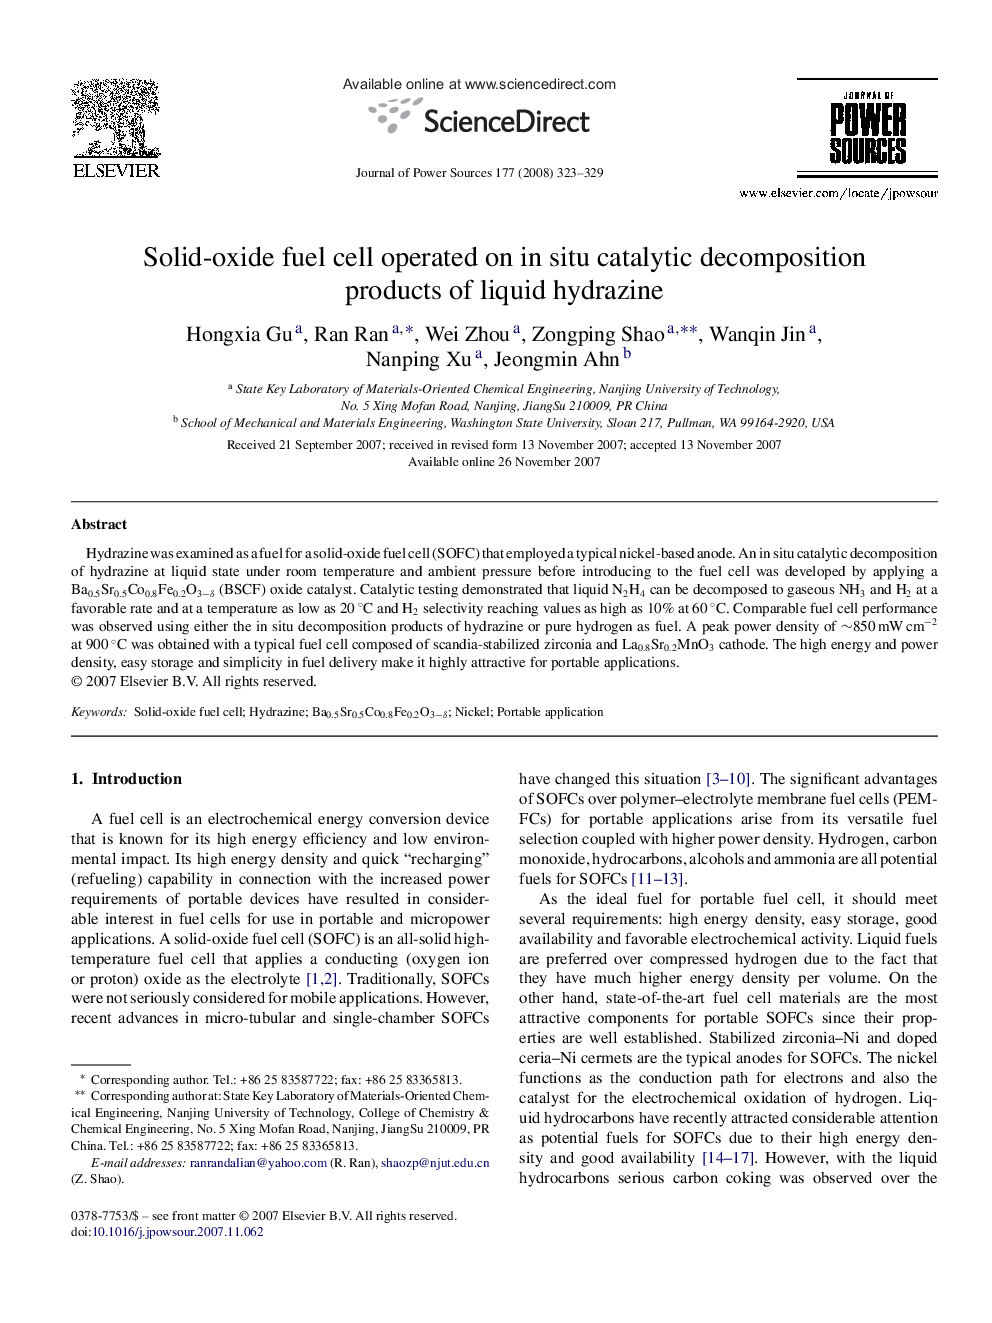 Solid-oxide fuel cell operated on in situ catalytic decomposition products of liquid hydrazine